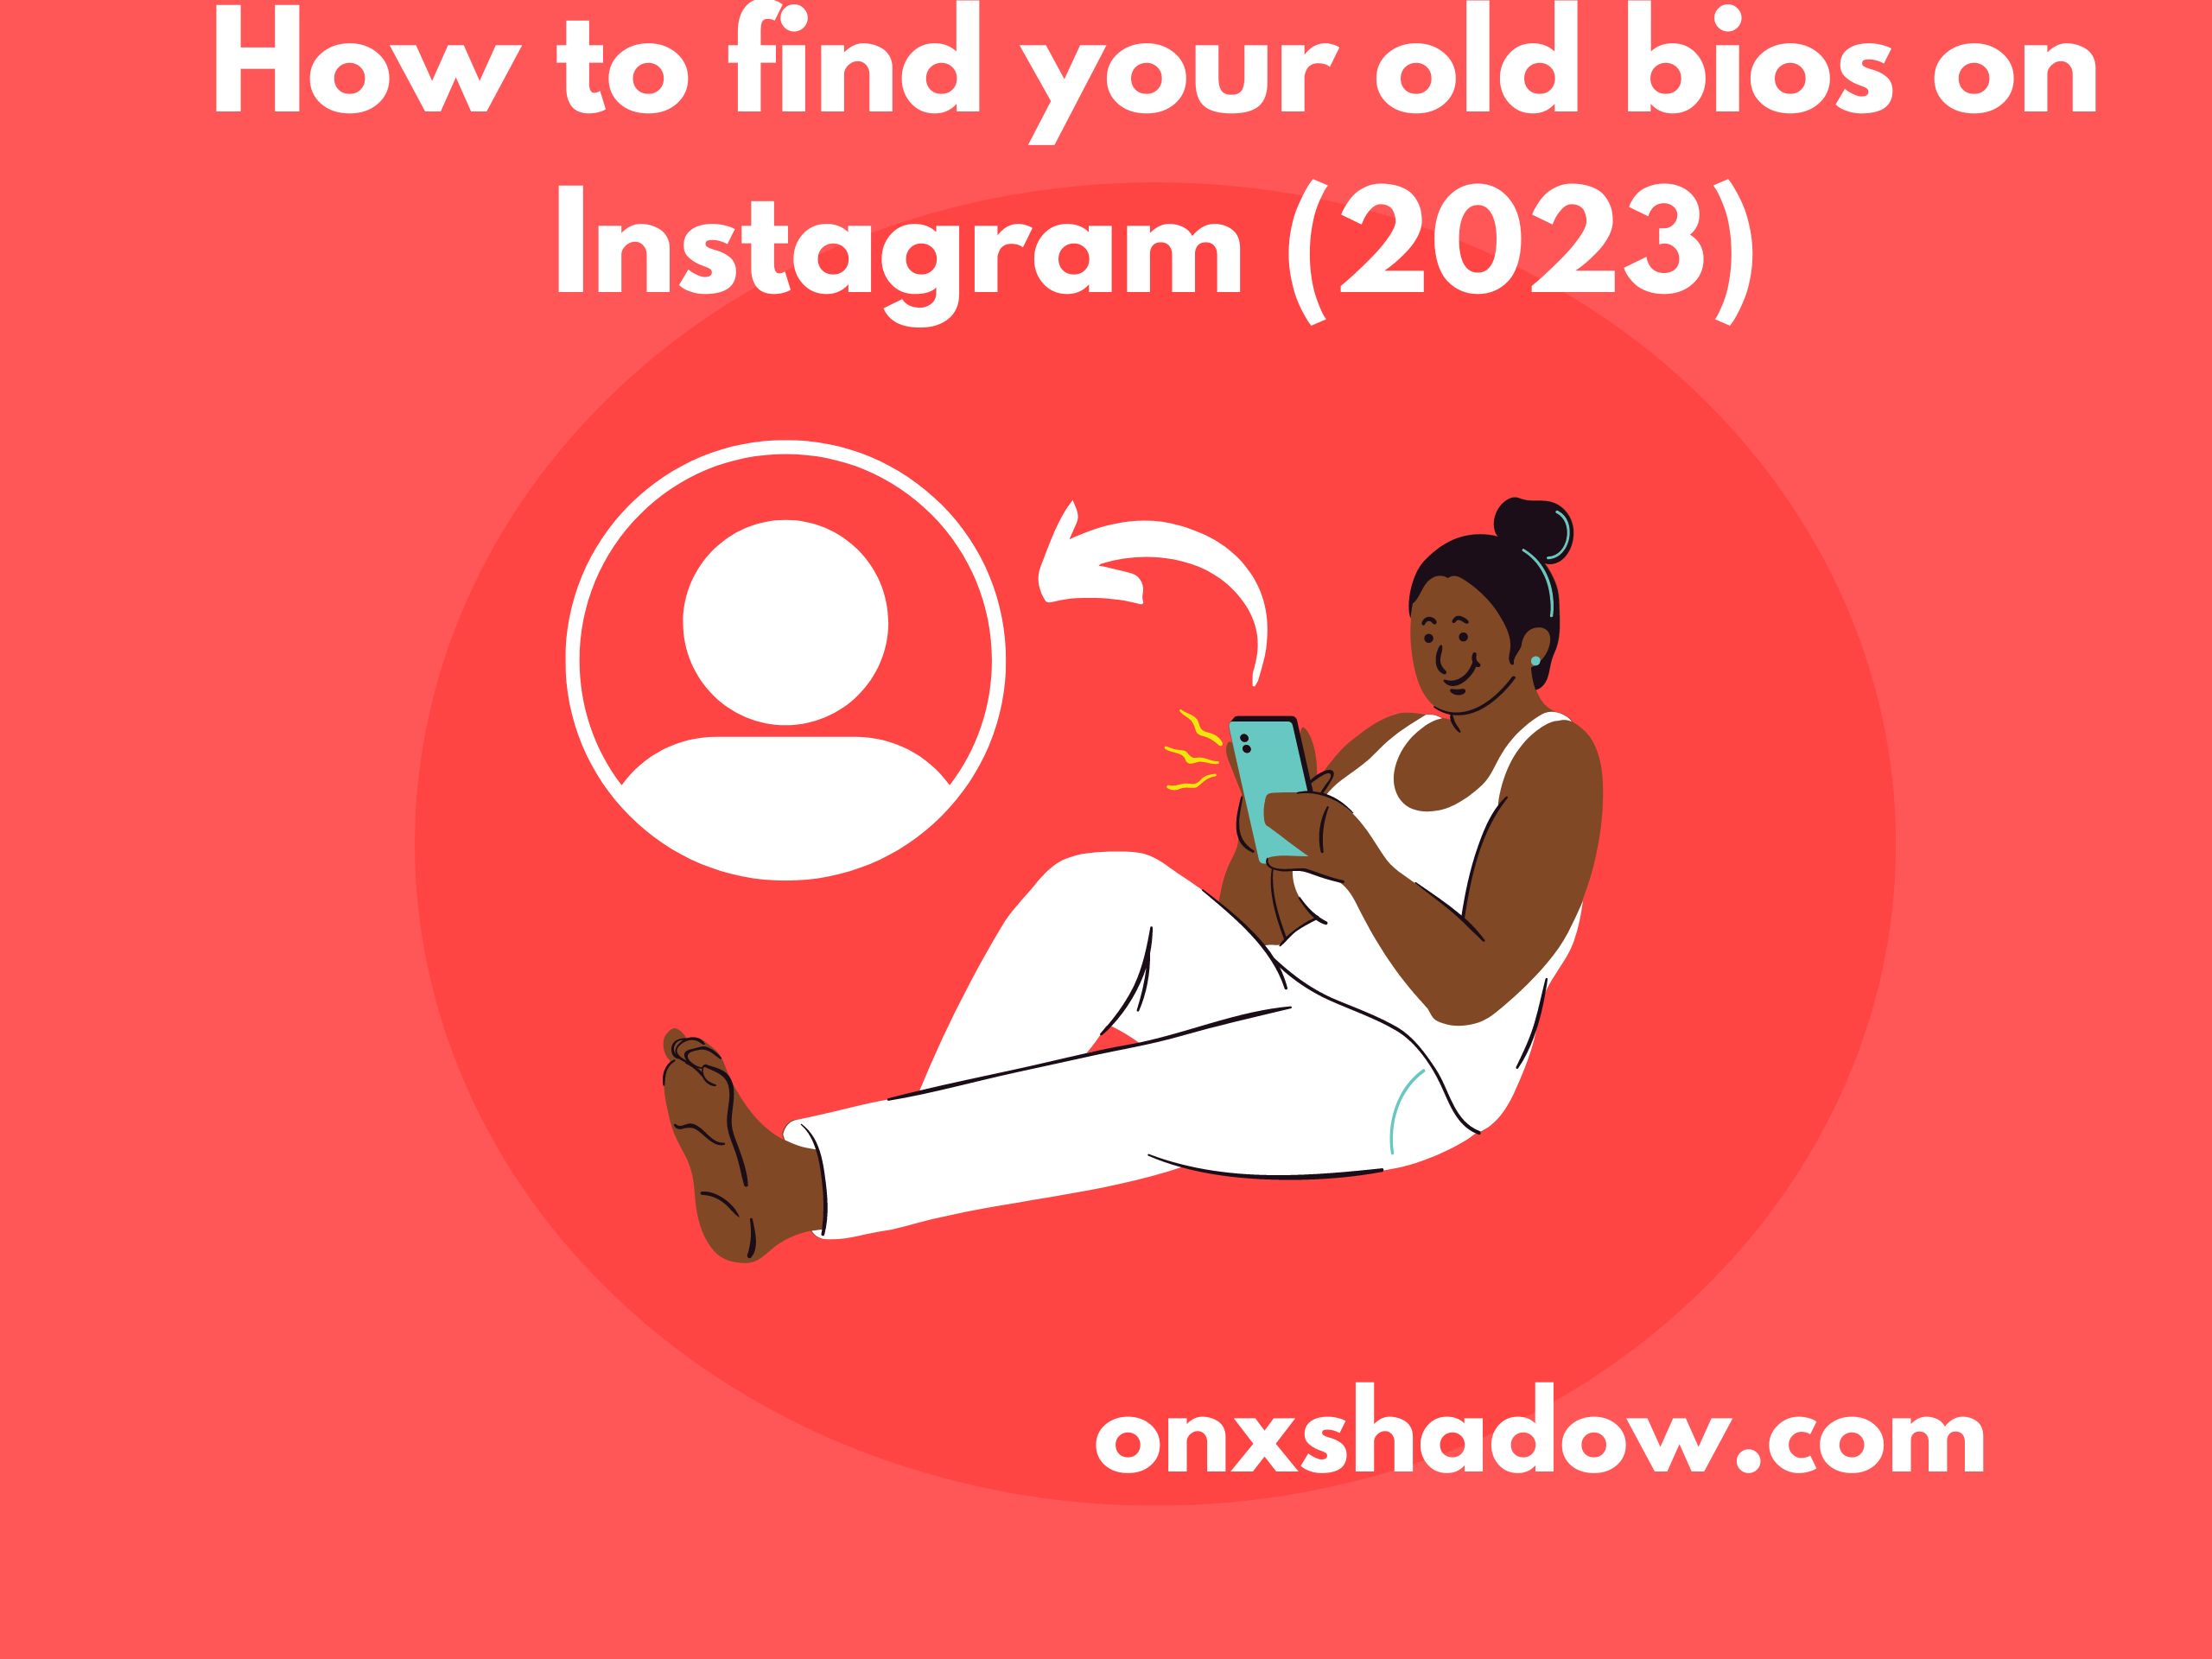 How to find your old bios on Instagram (2023)